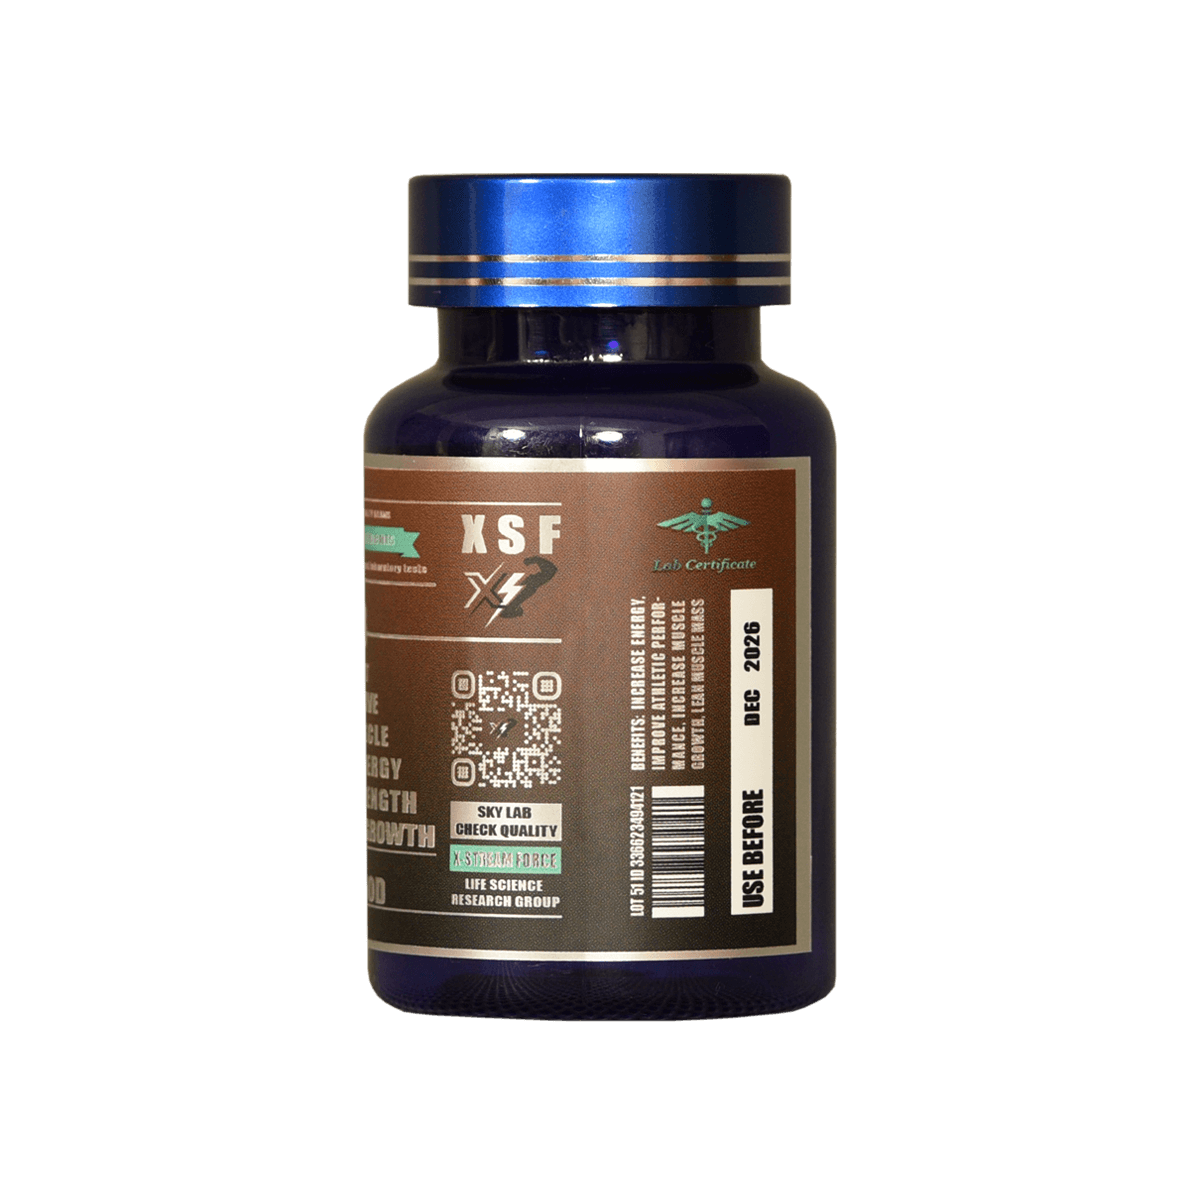 S23 fat cleaner - in capsules by 10mg - hard and dry look - very effective for recomp-definition-muscle-hunter